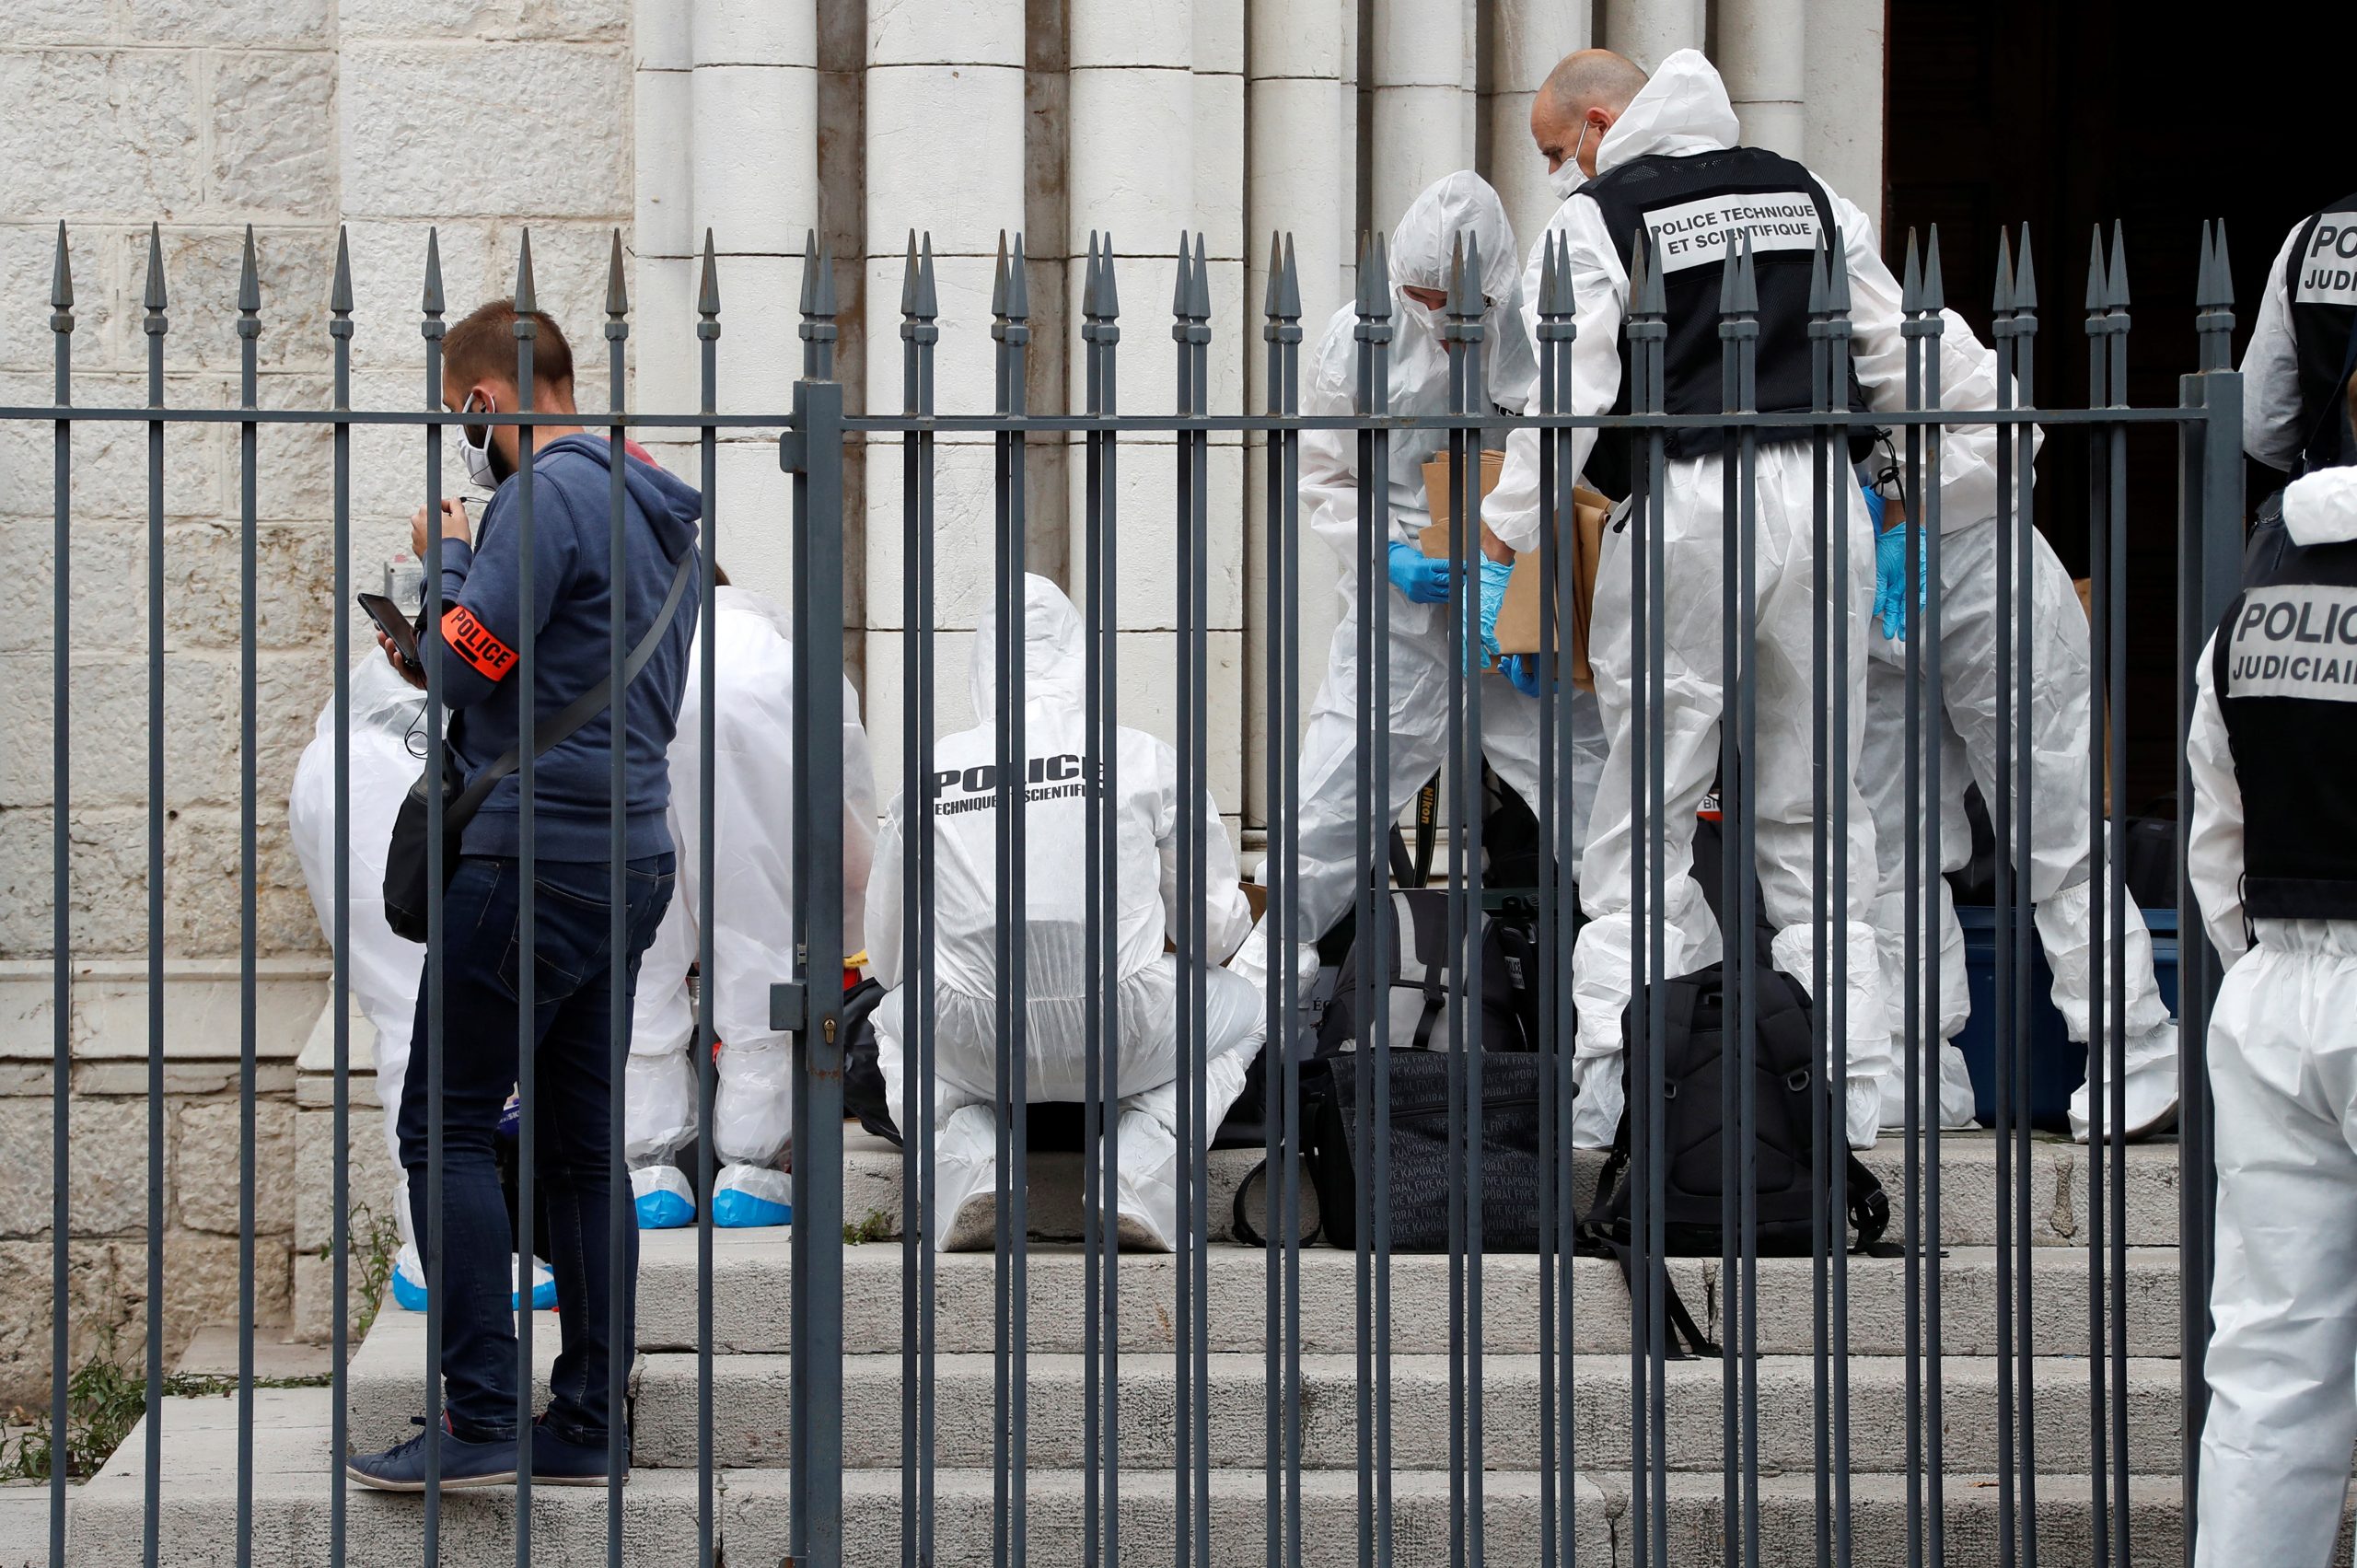 epa08782903 Forensic specialists inspect the scene of a reported knife attack at Notre Dame church in Nice, France, 29 October 2020. According to recent reports, at least three people are reported to have died in what officials treat as a terror attack. The attack comes less than a month after the beheading of a French middle school teacher in Paris on 16 October.  EPA/ERIC GAILLARD / POOL  MAXPPP OUT